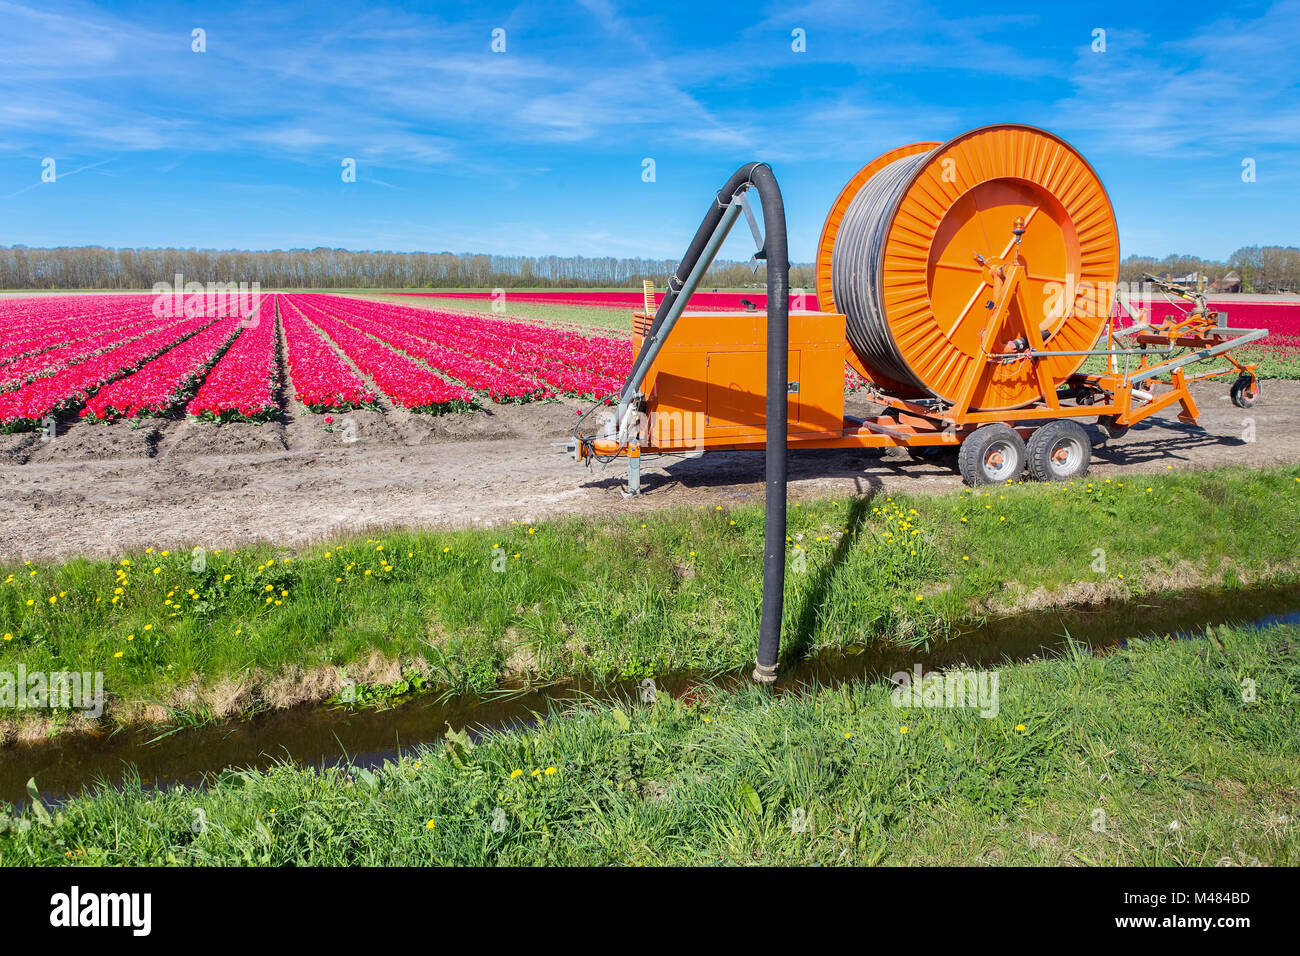 Agricultural sprinkler system pumping water from ditch to tulips flowers Stock Photo